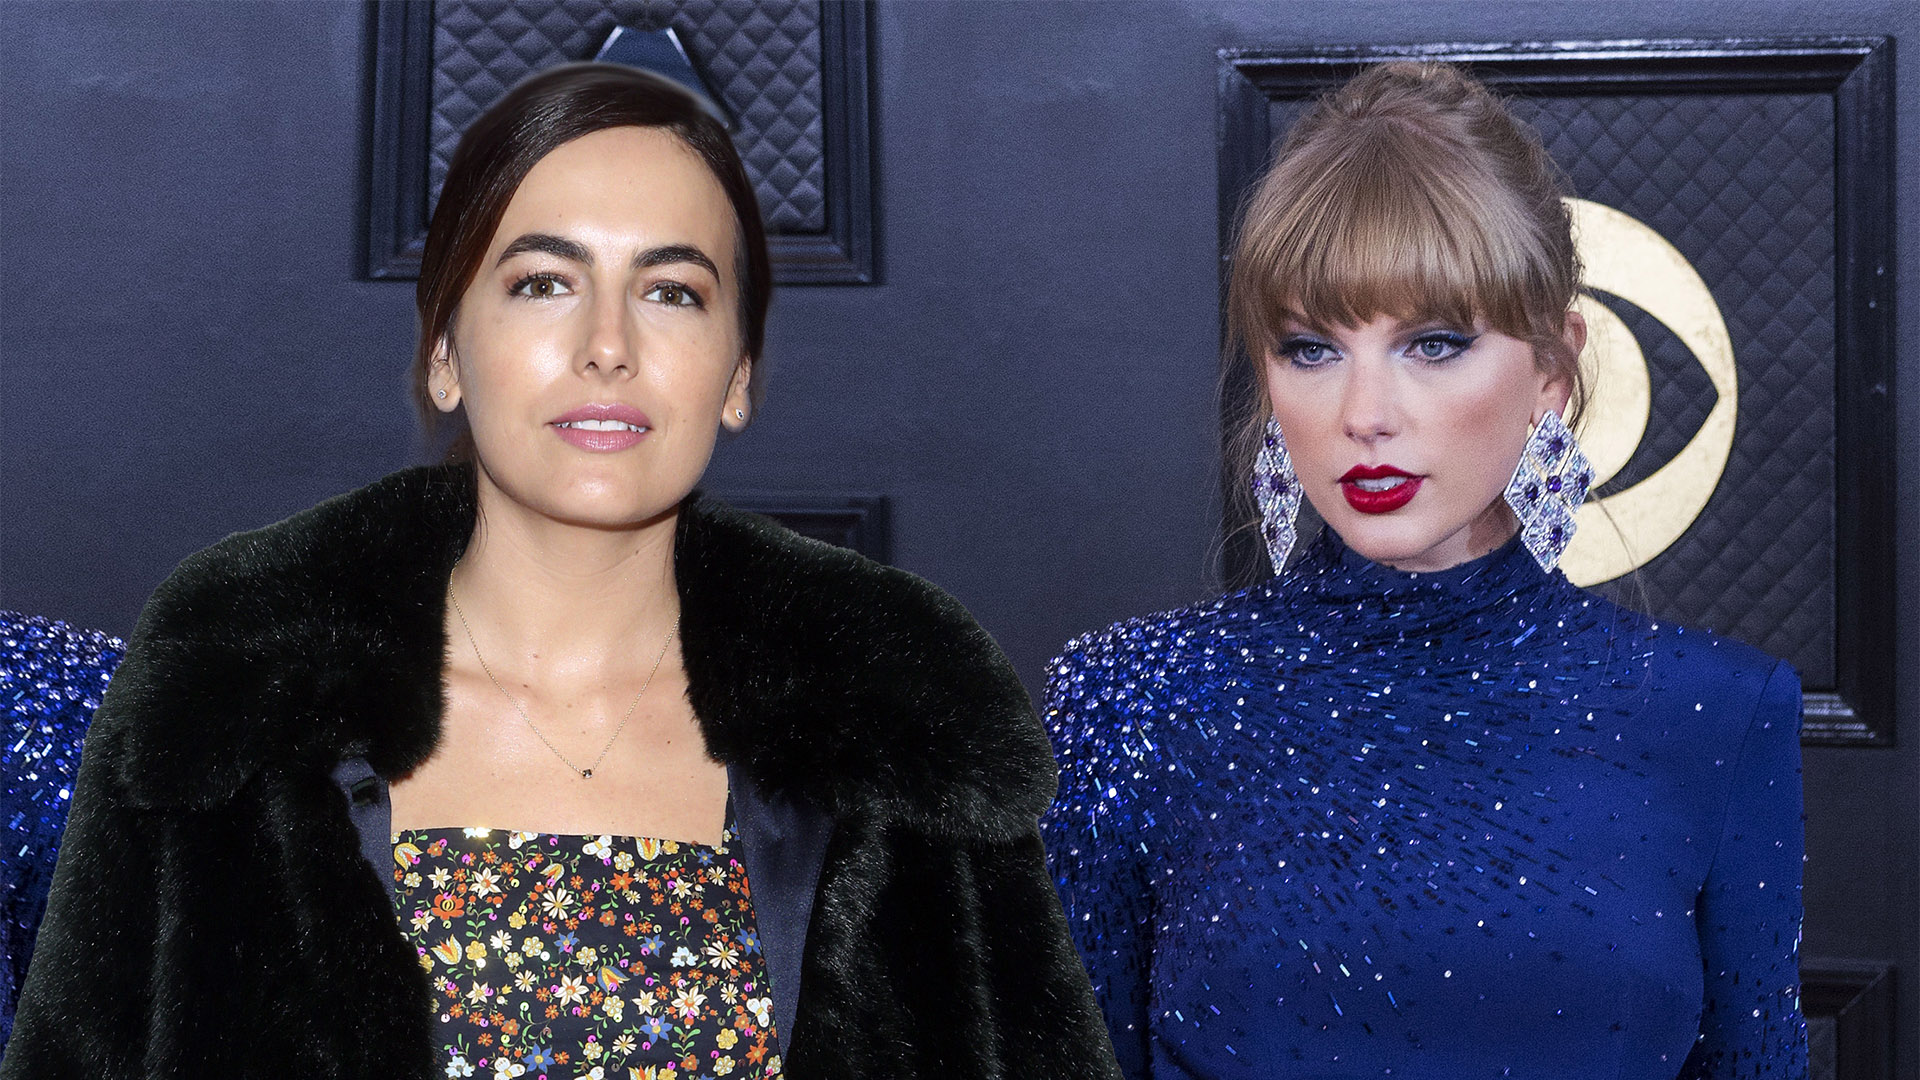 Camilla Belle And Taylor Swift's Not-so-Subtle Feud, Explained